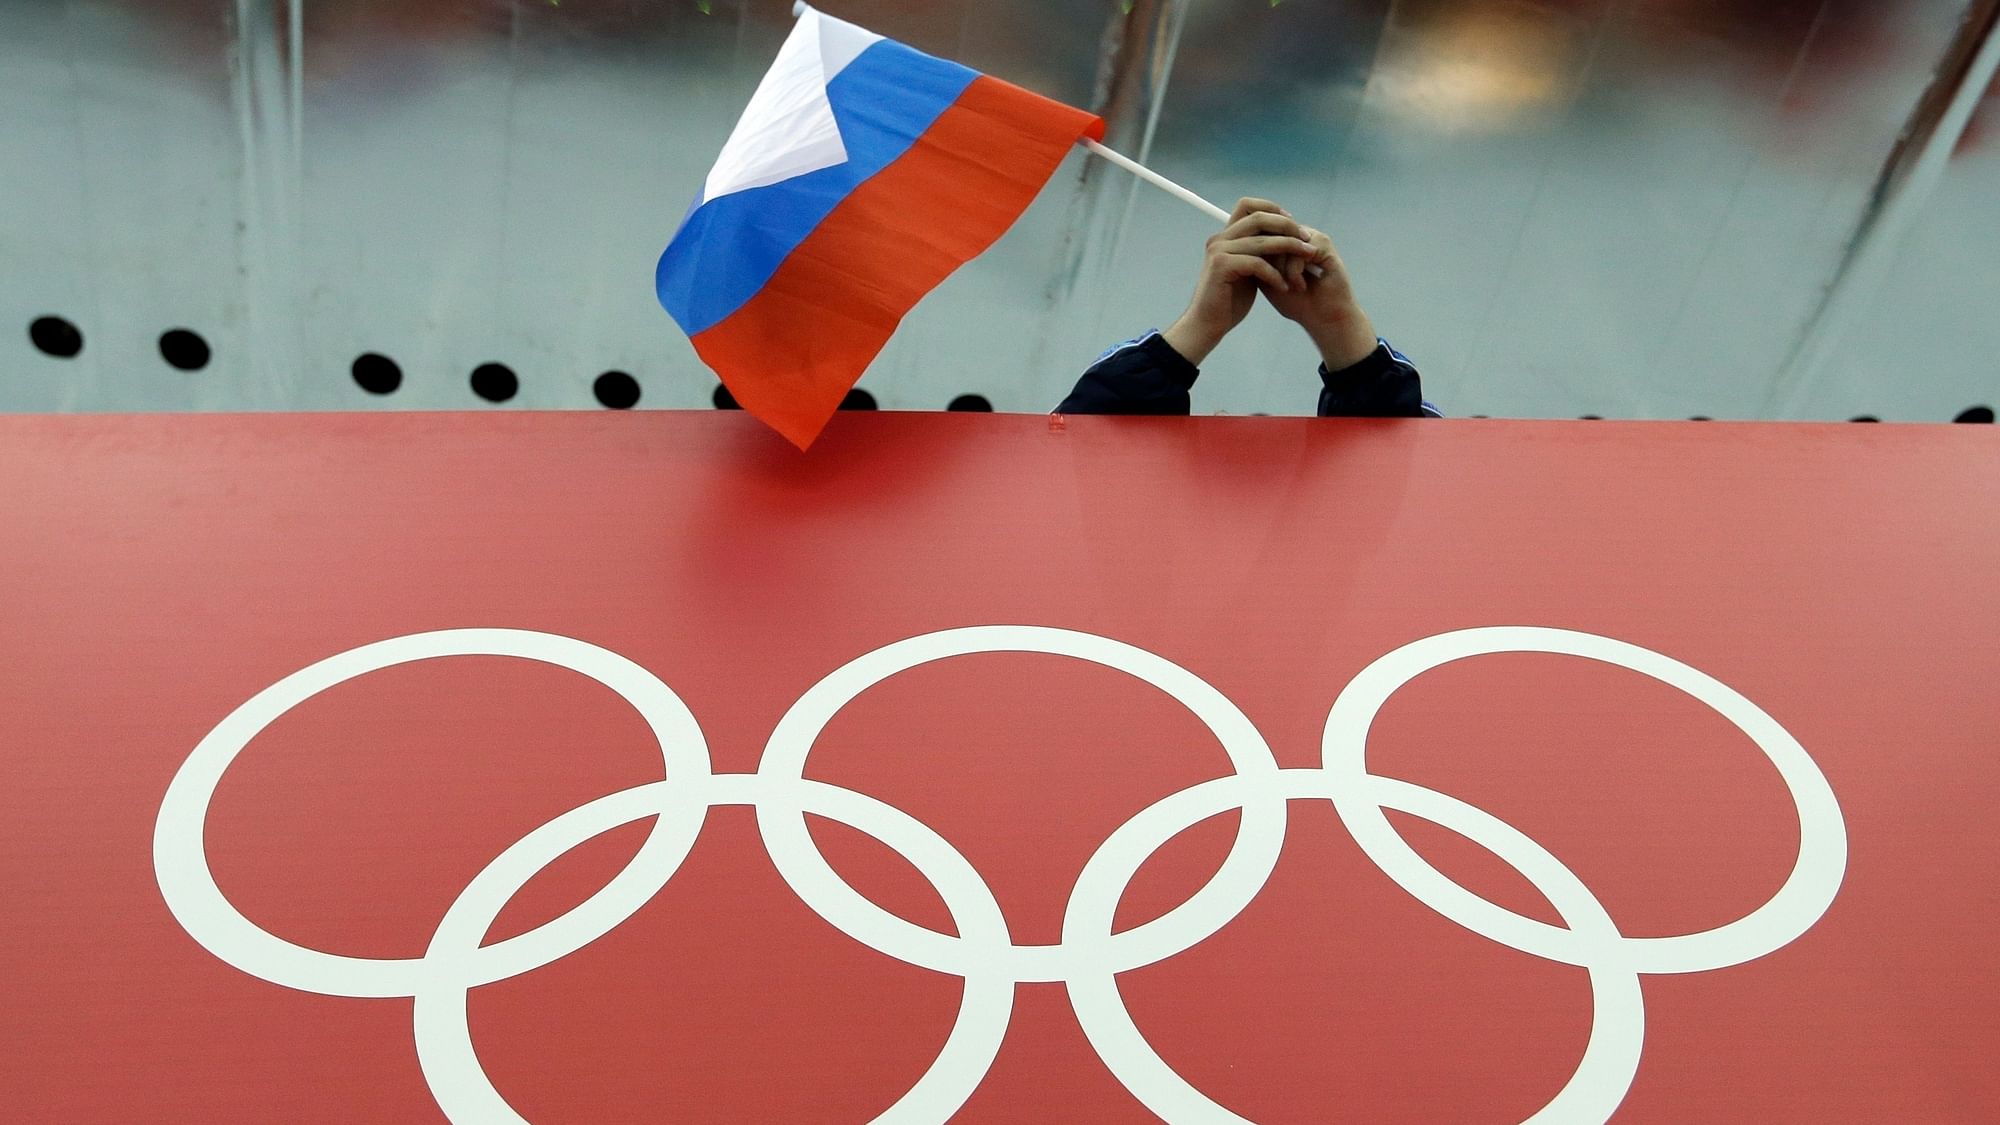 Russian athletes will have a chance to compete at next year’s Olympics, but their flag would not fly in Tokyo if the WADA approves a recommendation.